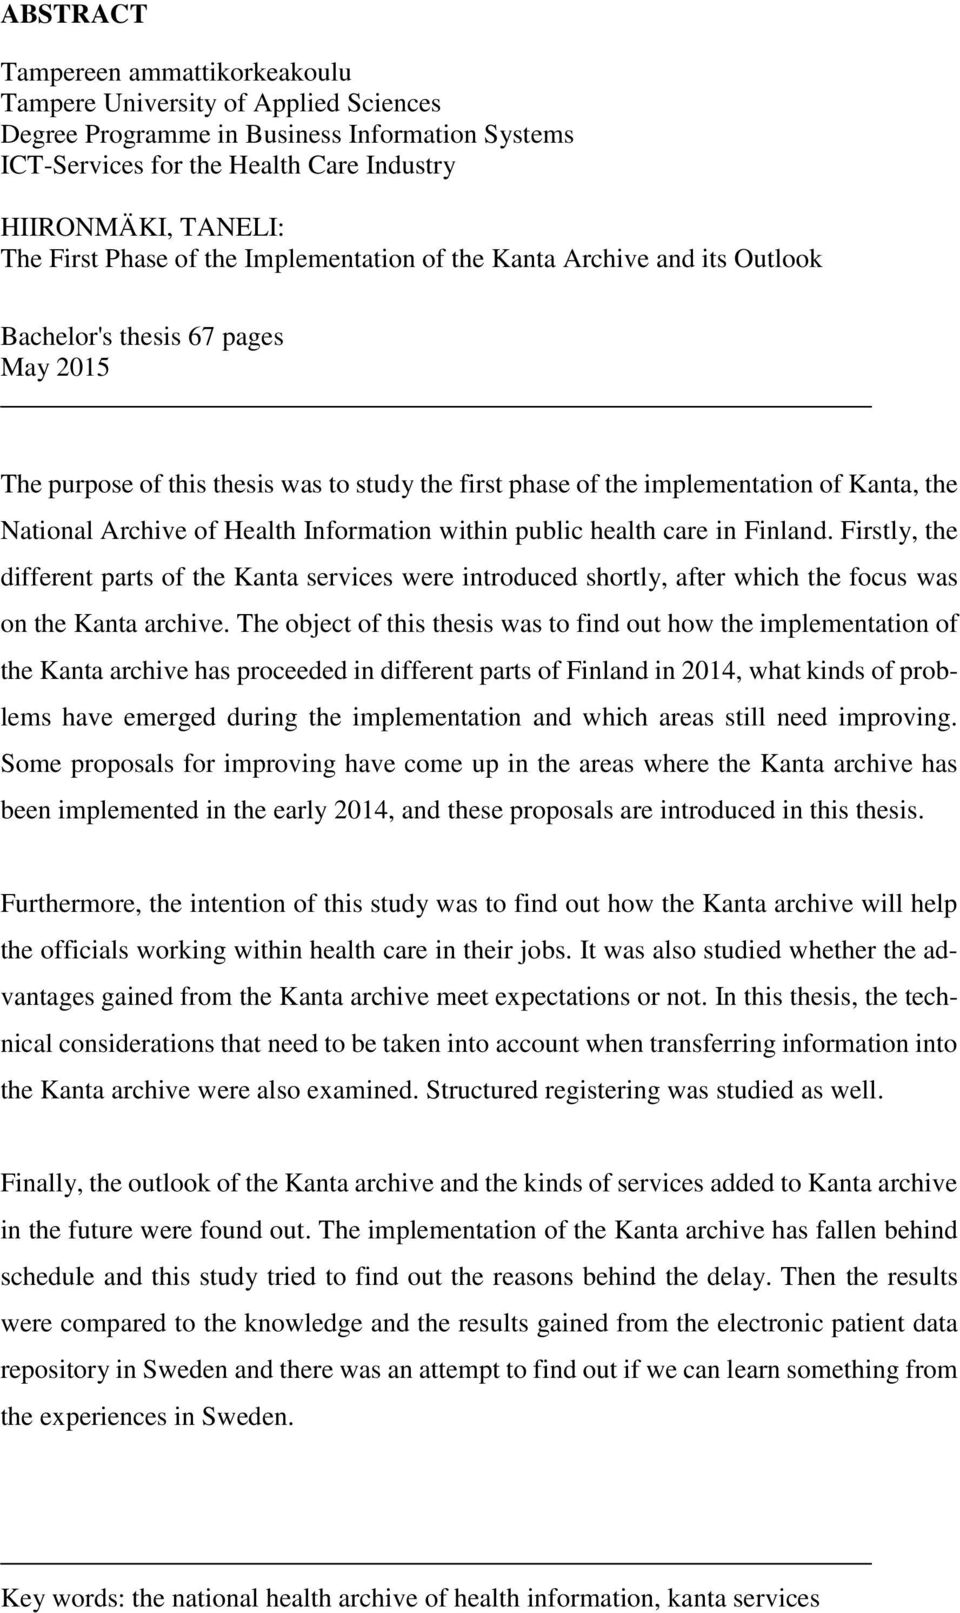 National Archive of Health Information within public health care in Finland. Firstly, the different parts of the Kanta services were introduced shortly, after which the focus was on the Kanta archive.